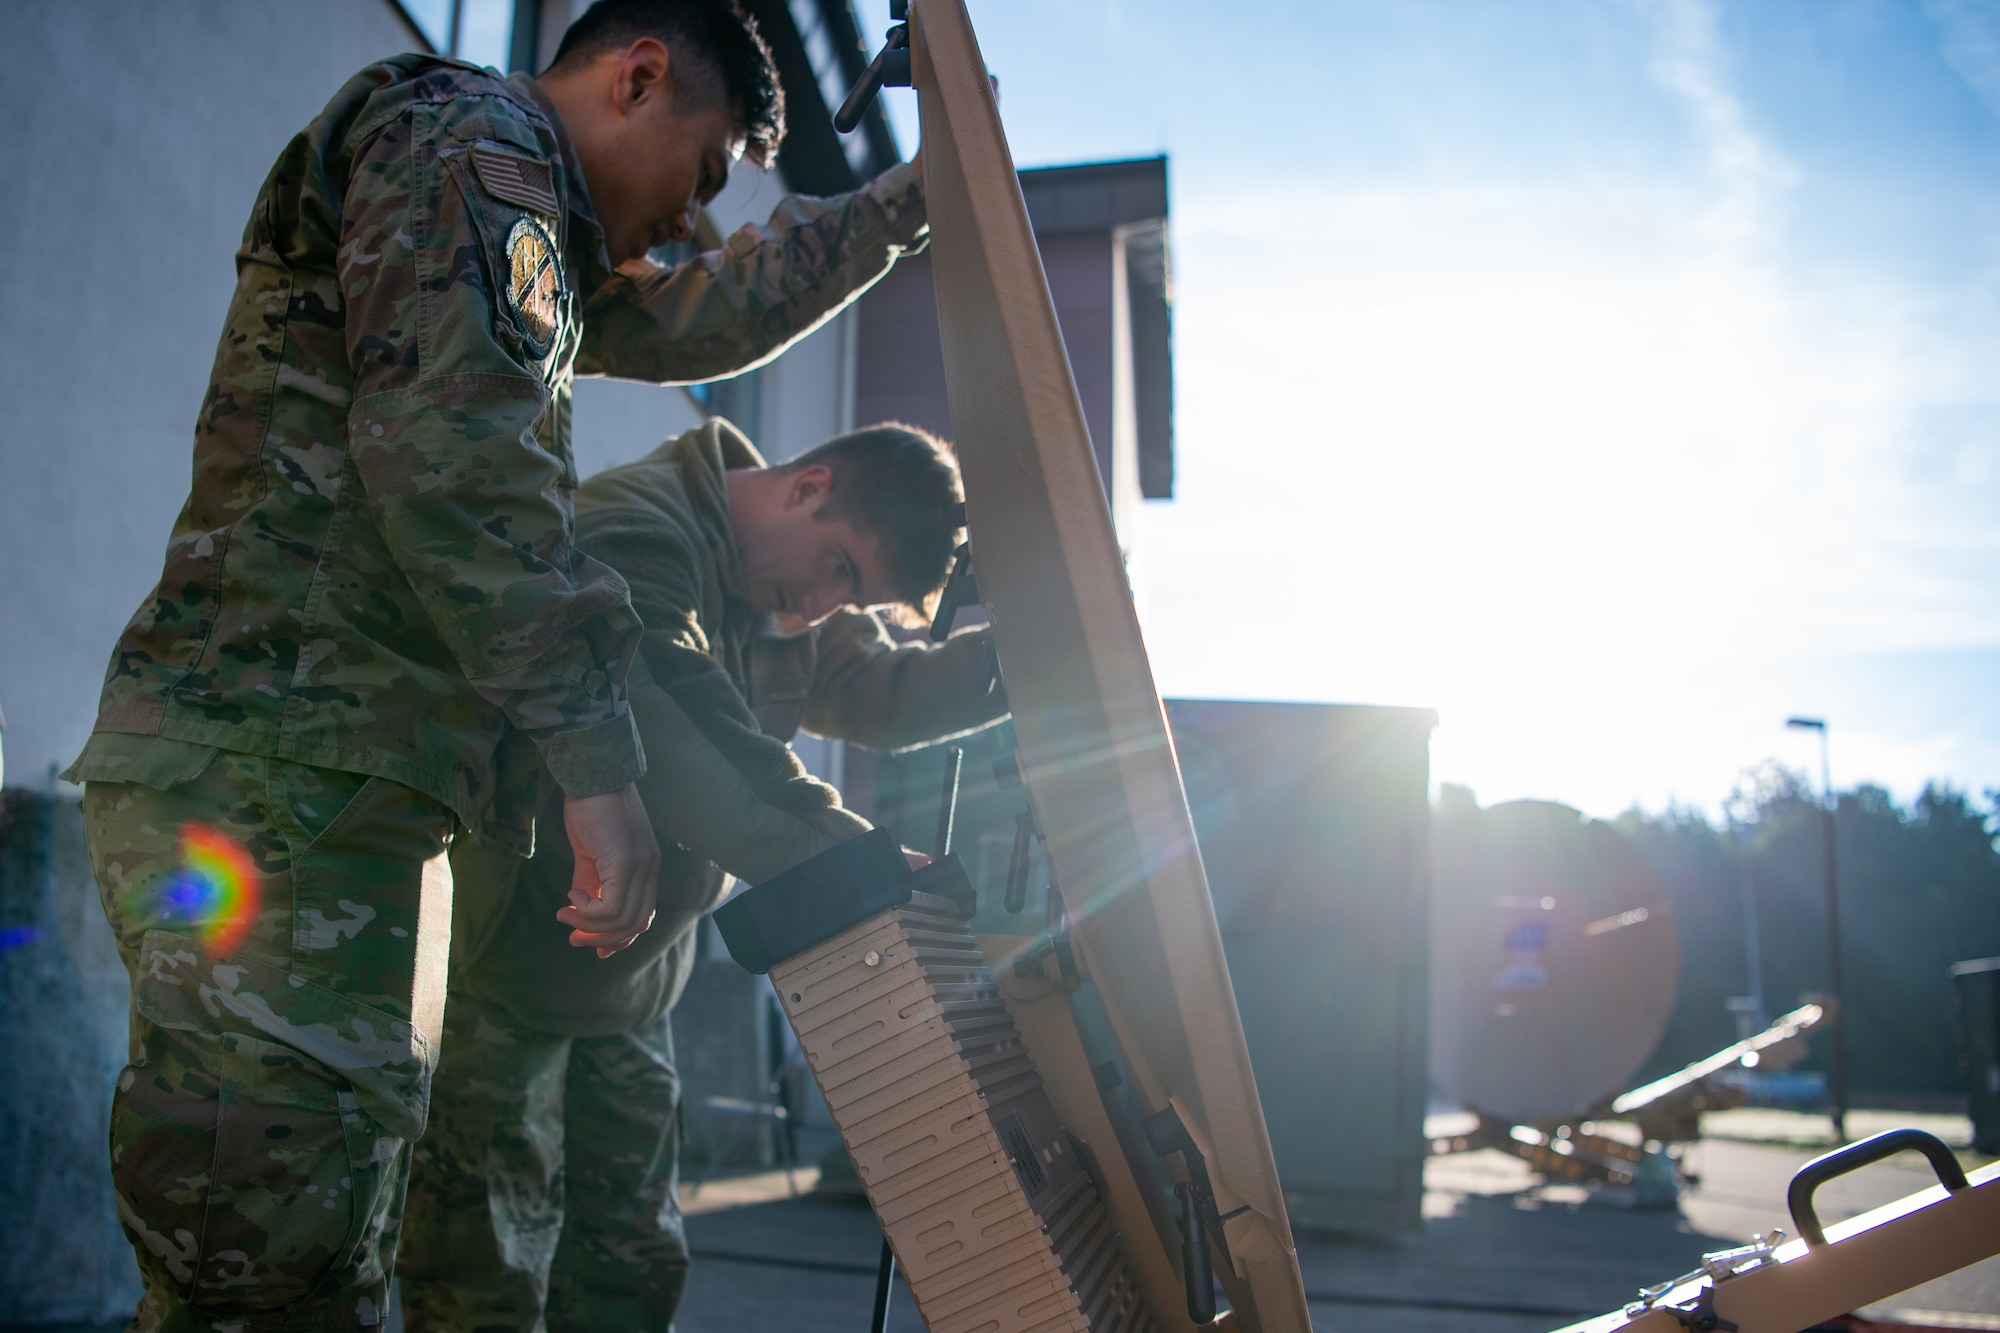 Airmen disassemble an antenna to respond to a simulated communication issue